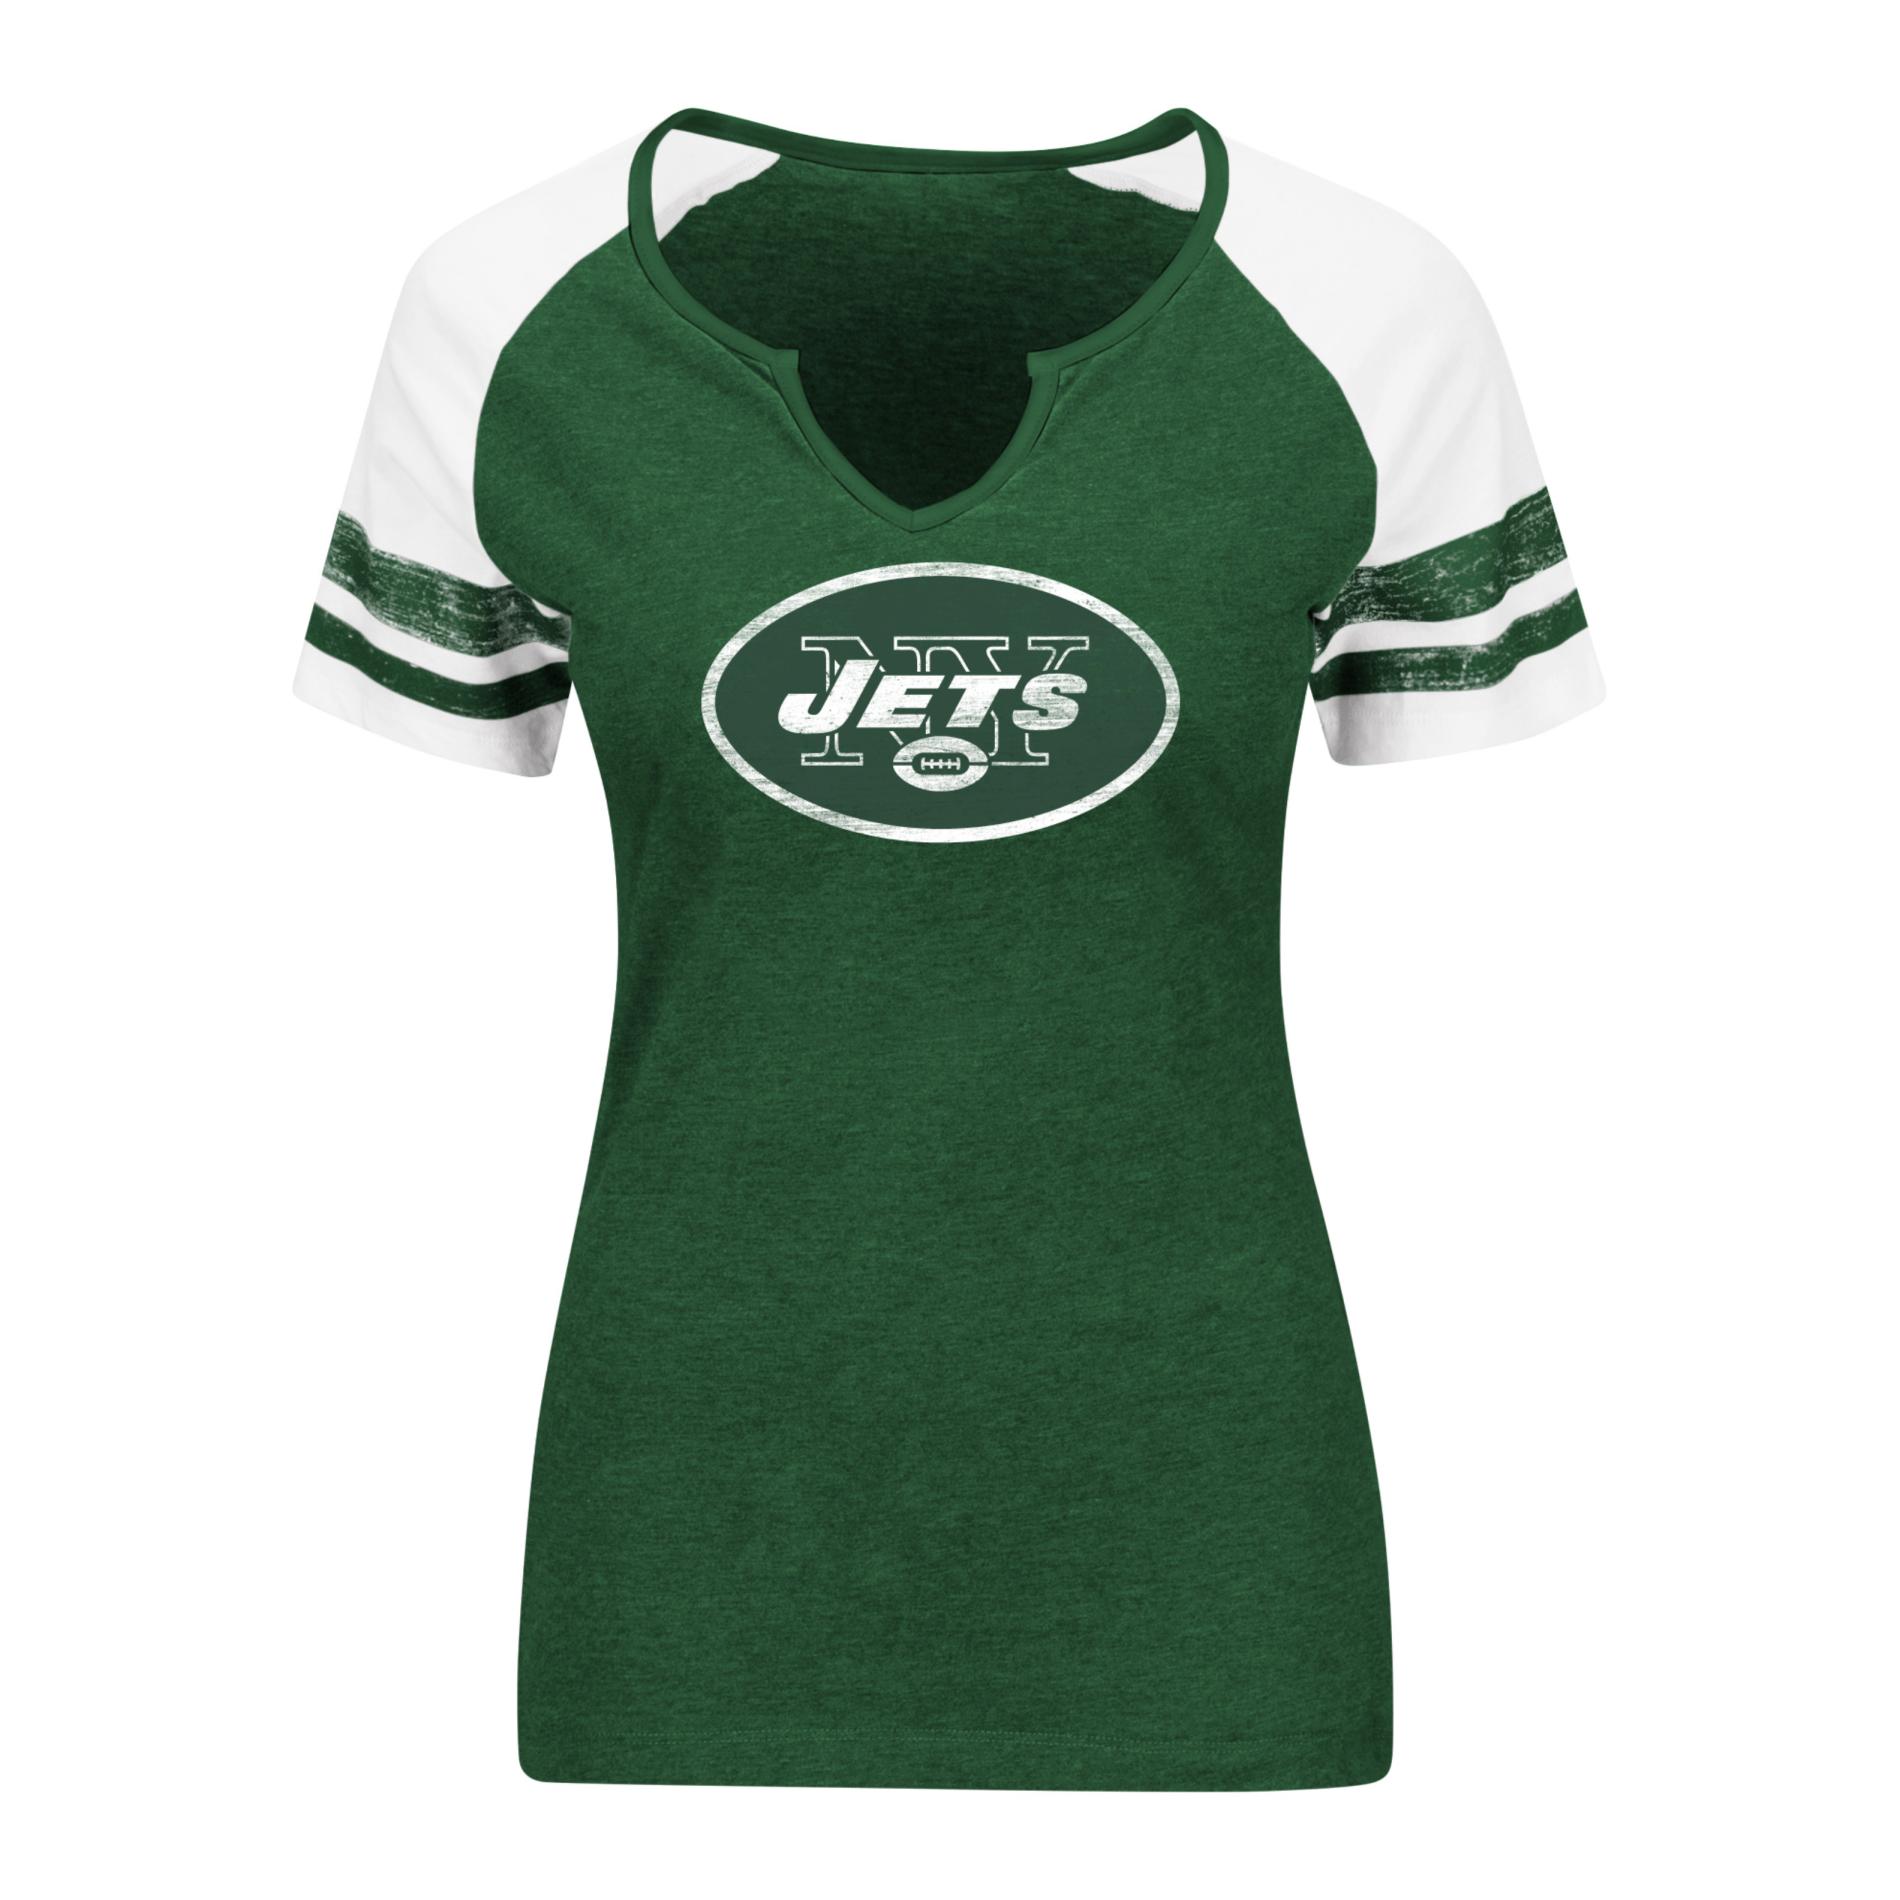 NFL Women's Notched Neck Graphic T-Shirt - New York Jets